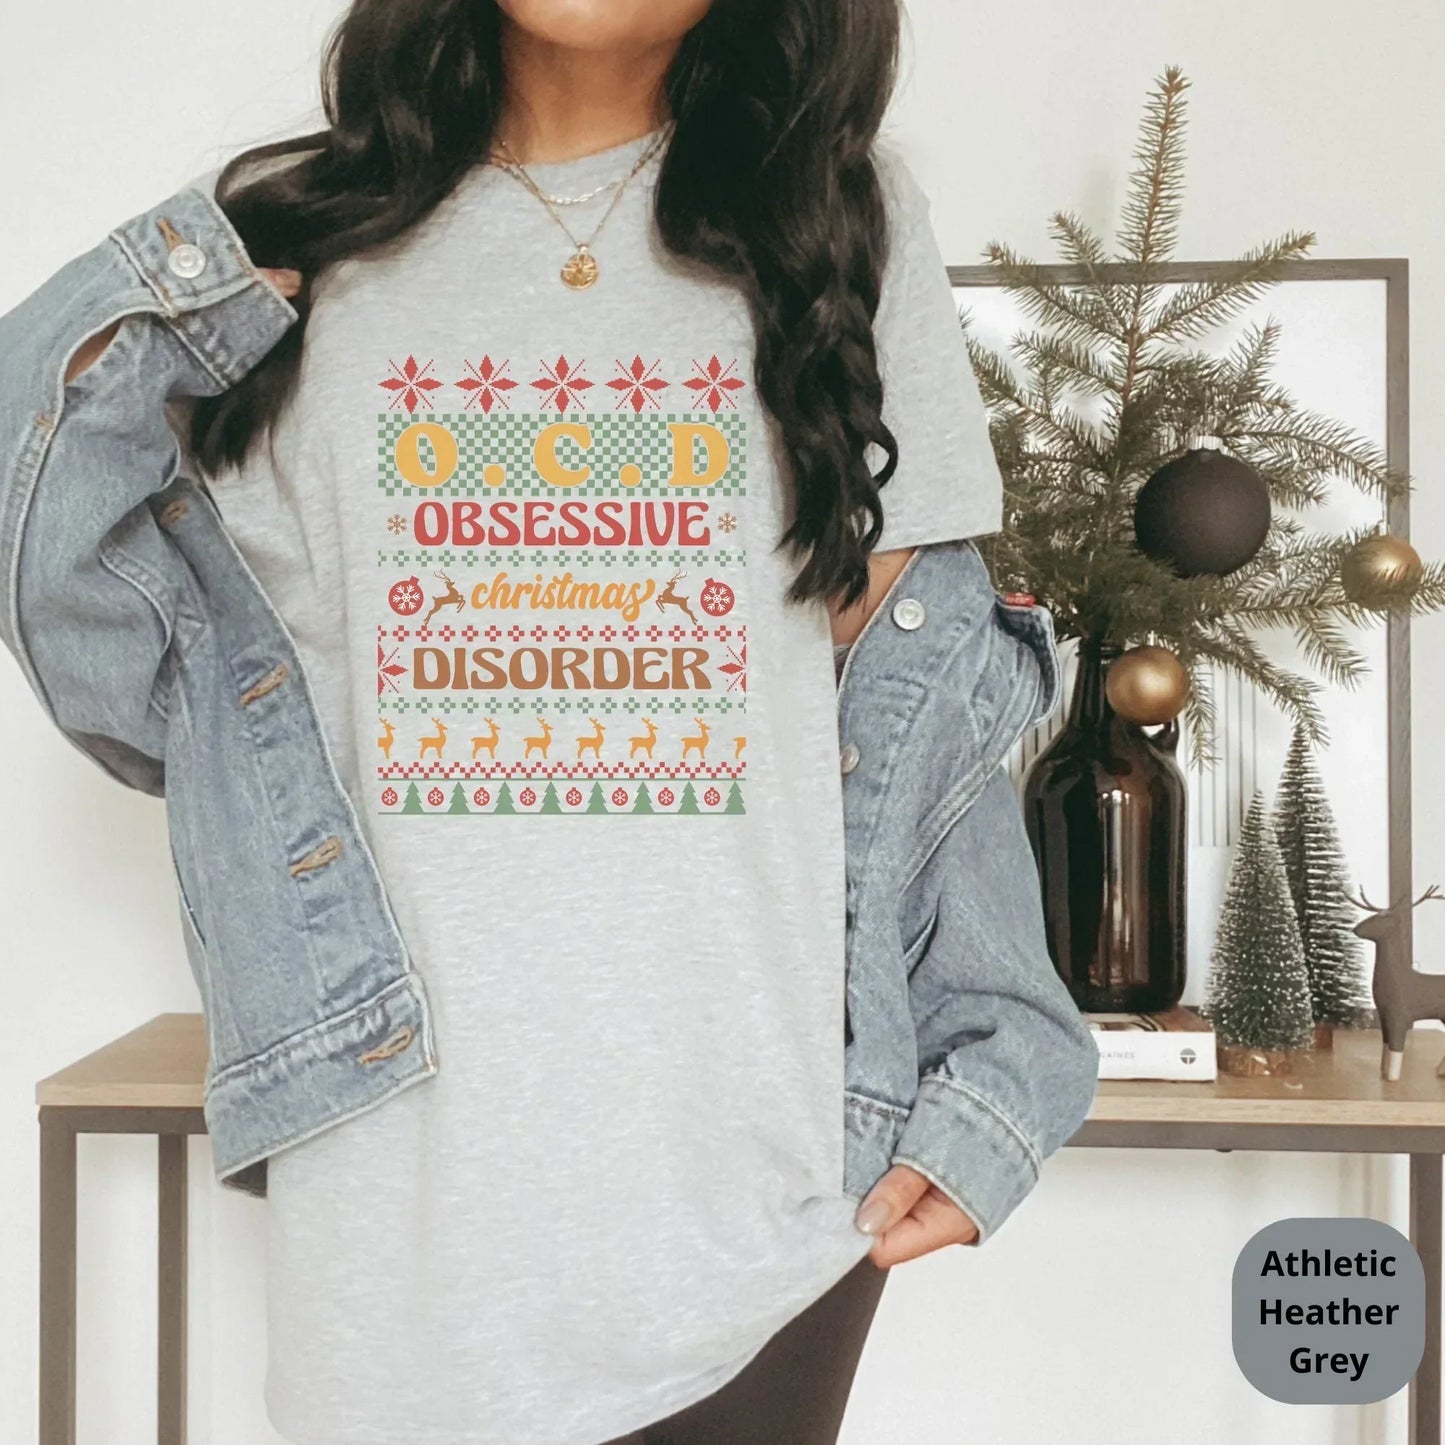 Funny Christmas Sweatshirt, Ugly Christmas Sweater, Sarcastic Christmas Gift for Her, Coworker Gift for Him, Comfort Colors Oversized Tee HMDesignStudioUS